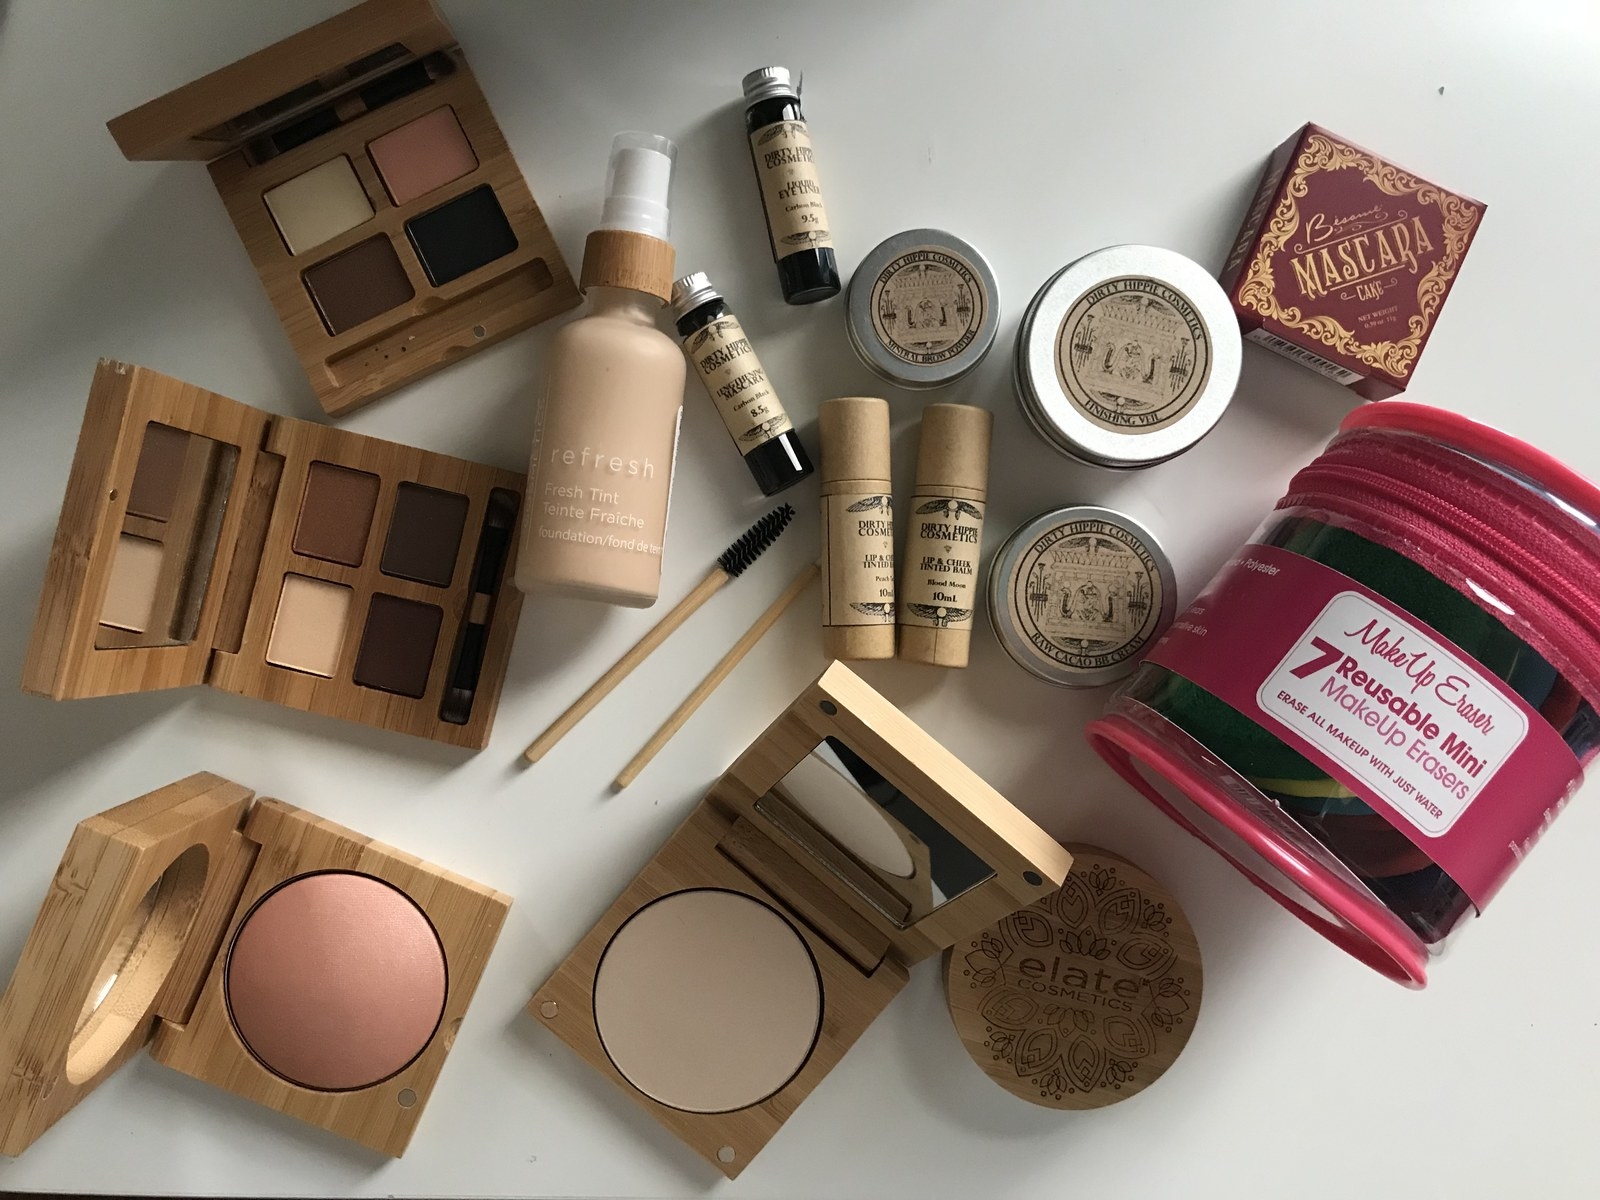 Here's What Happened I Tried A Zero-Waste Makeup Challenge For A Week